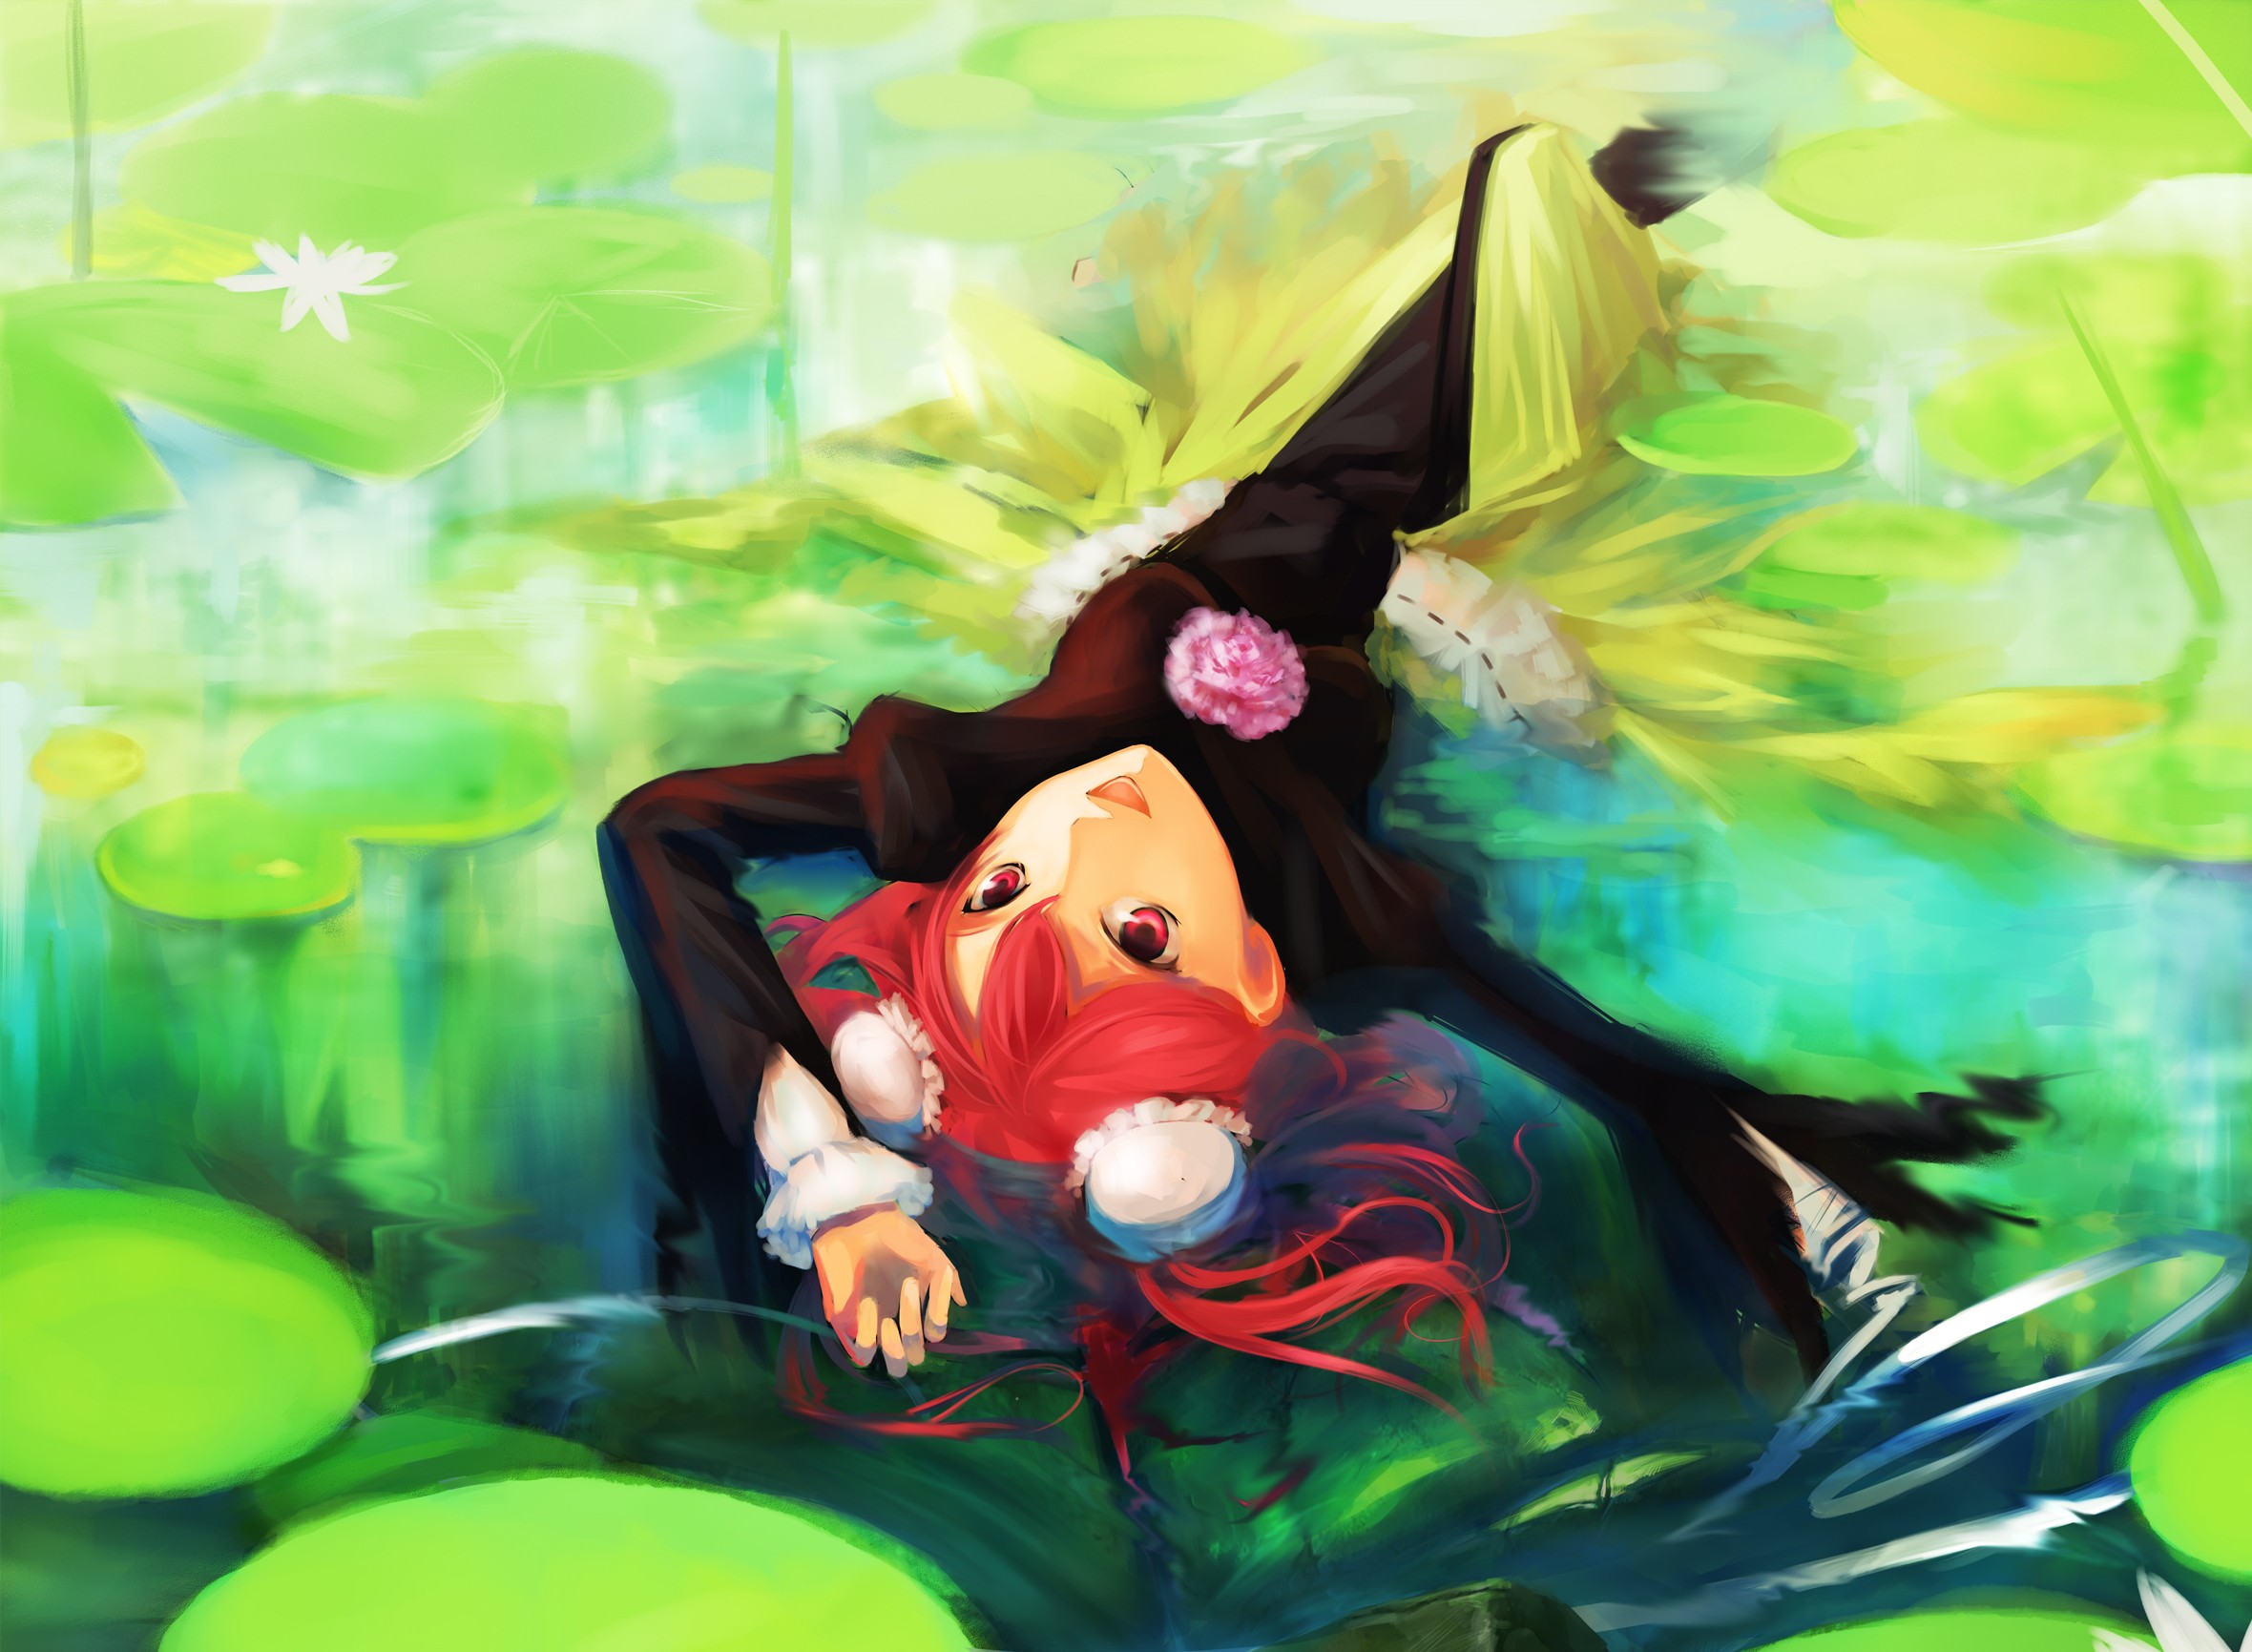 green, Water, Video, Games, Nature, Touhou, Dress, Flowers, Redheads, Pond, Plants, Red, Eyes, Short, Hair, Lying, Down, Open, Mouth, Lily, Pads, Upside, Down, Hair, Bun, Ibara, Kasen, Hair, Ornaments Wallpaper